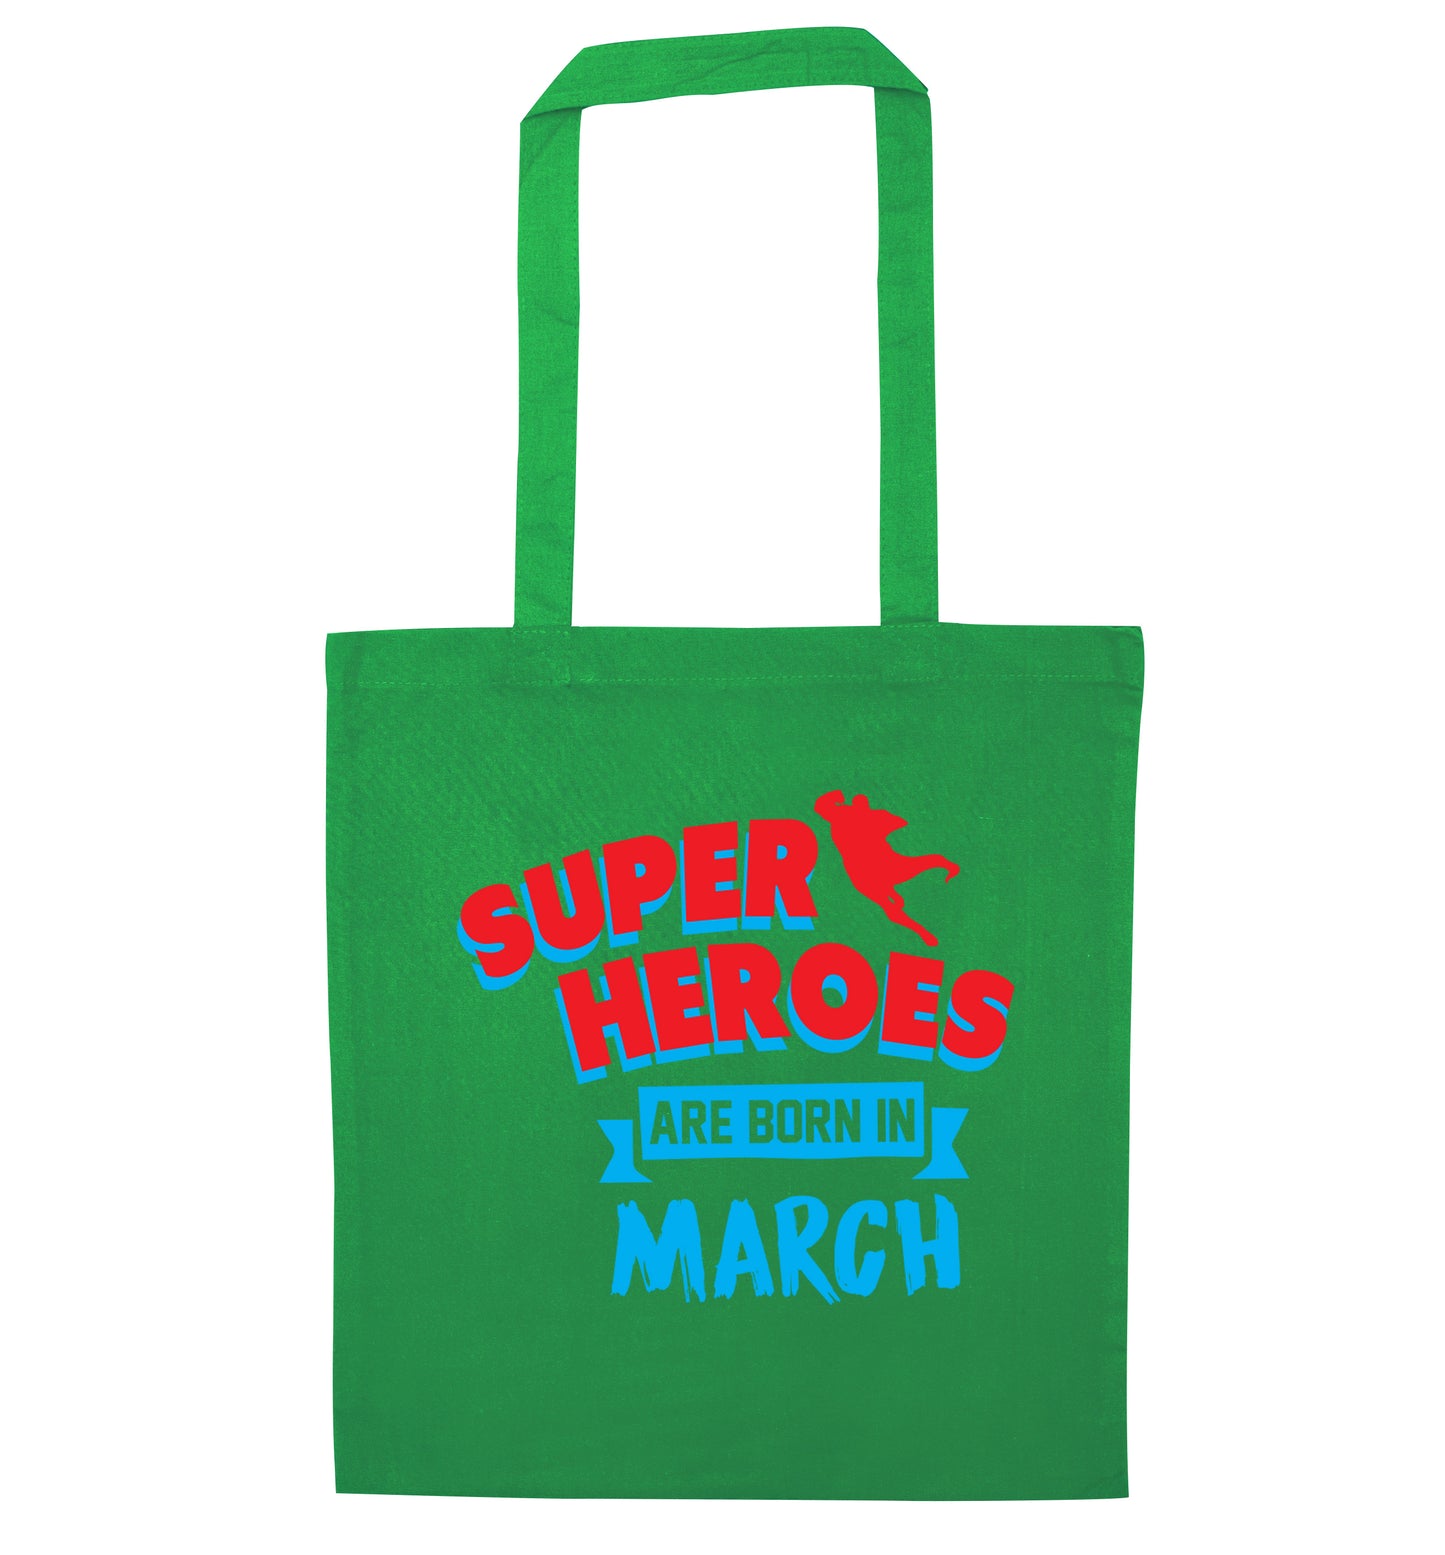 Superheros are born in March green tote bag